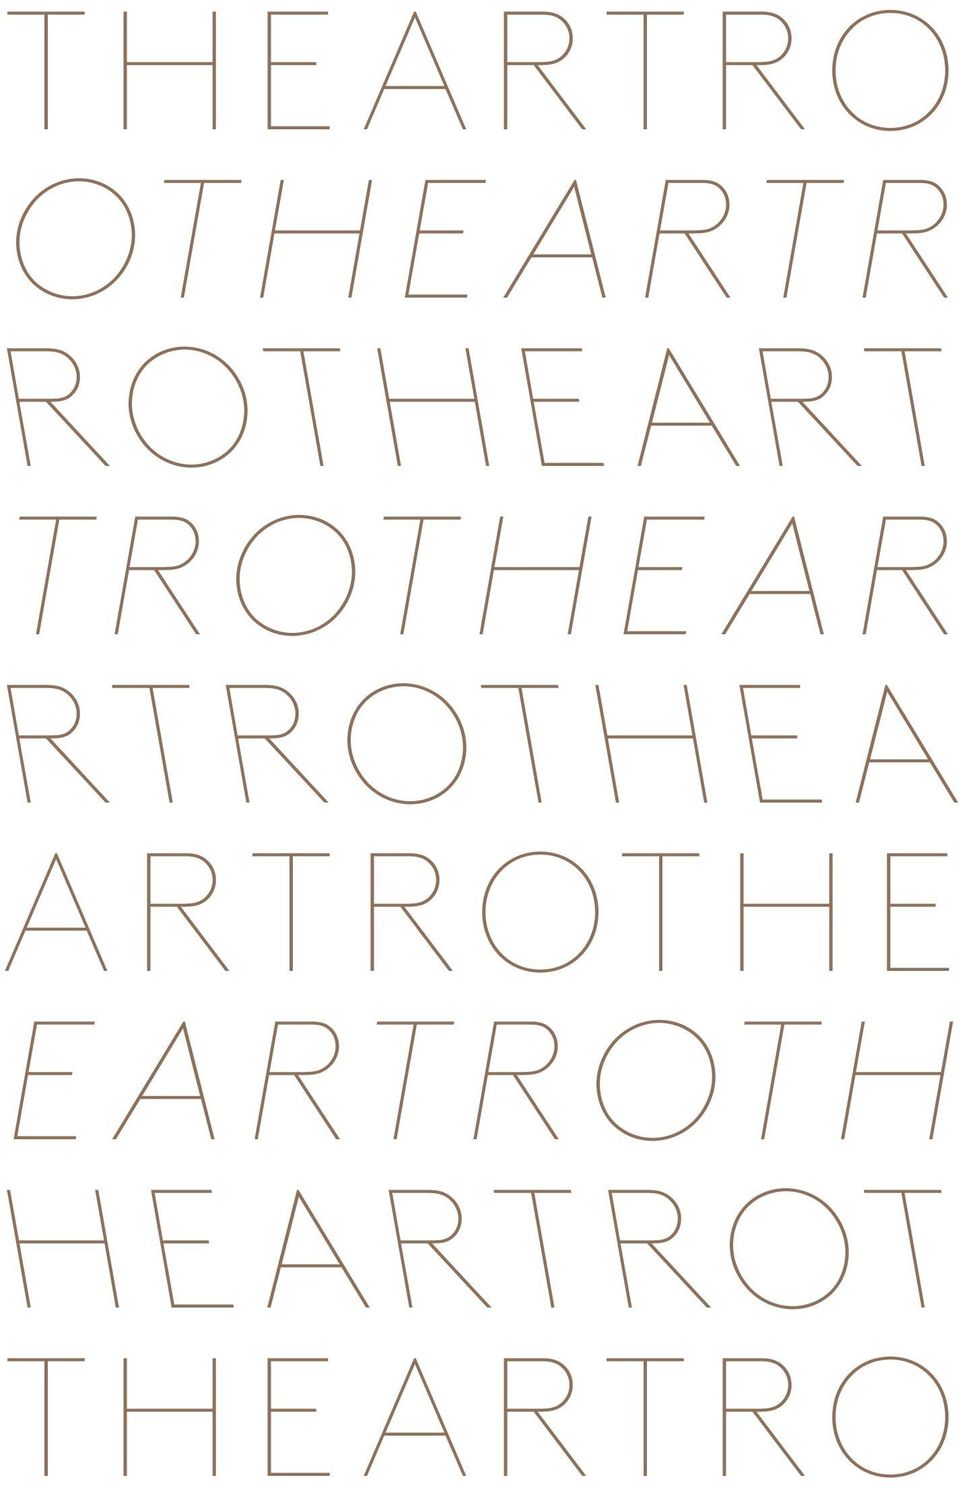 RTROTHEA ARTROTHE